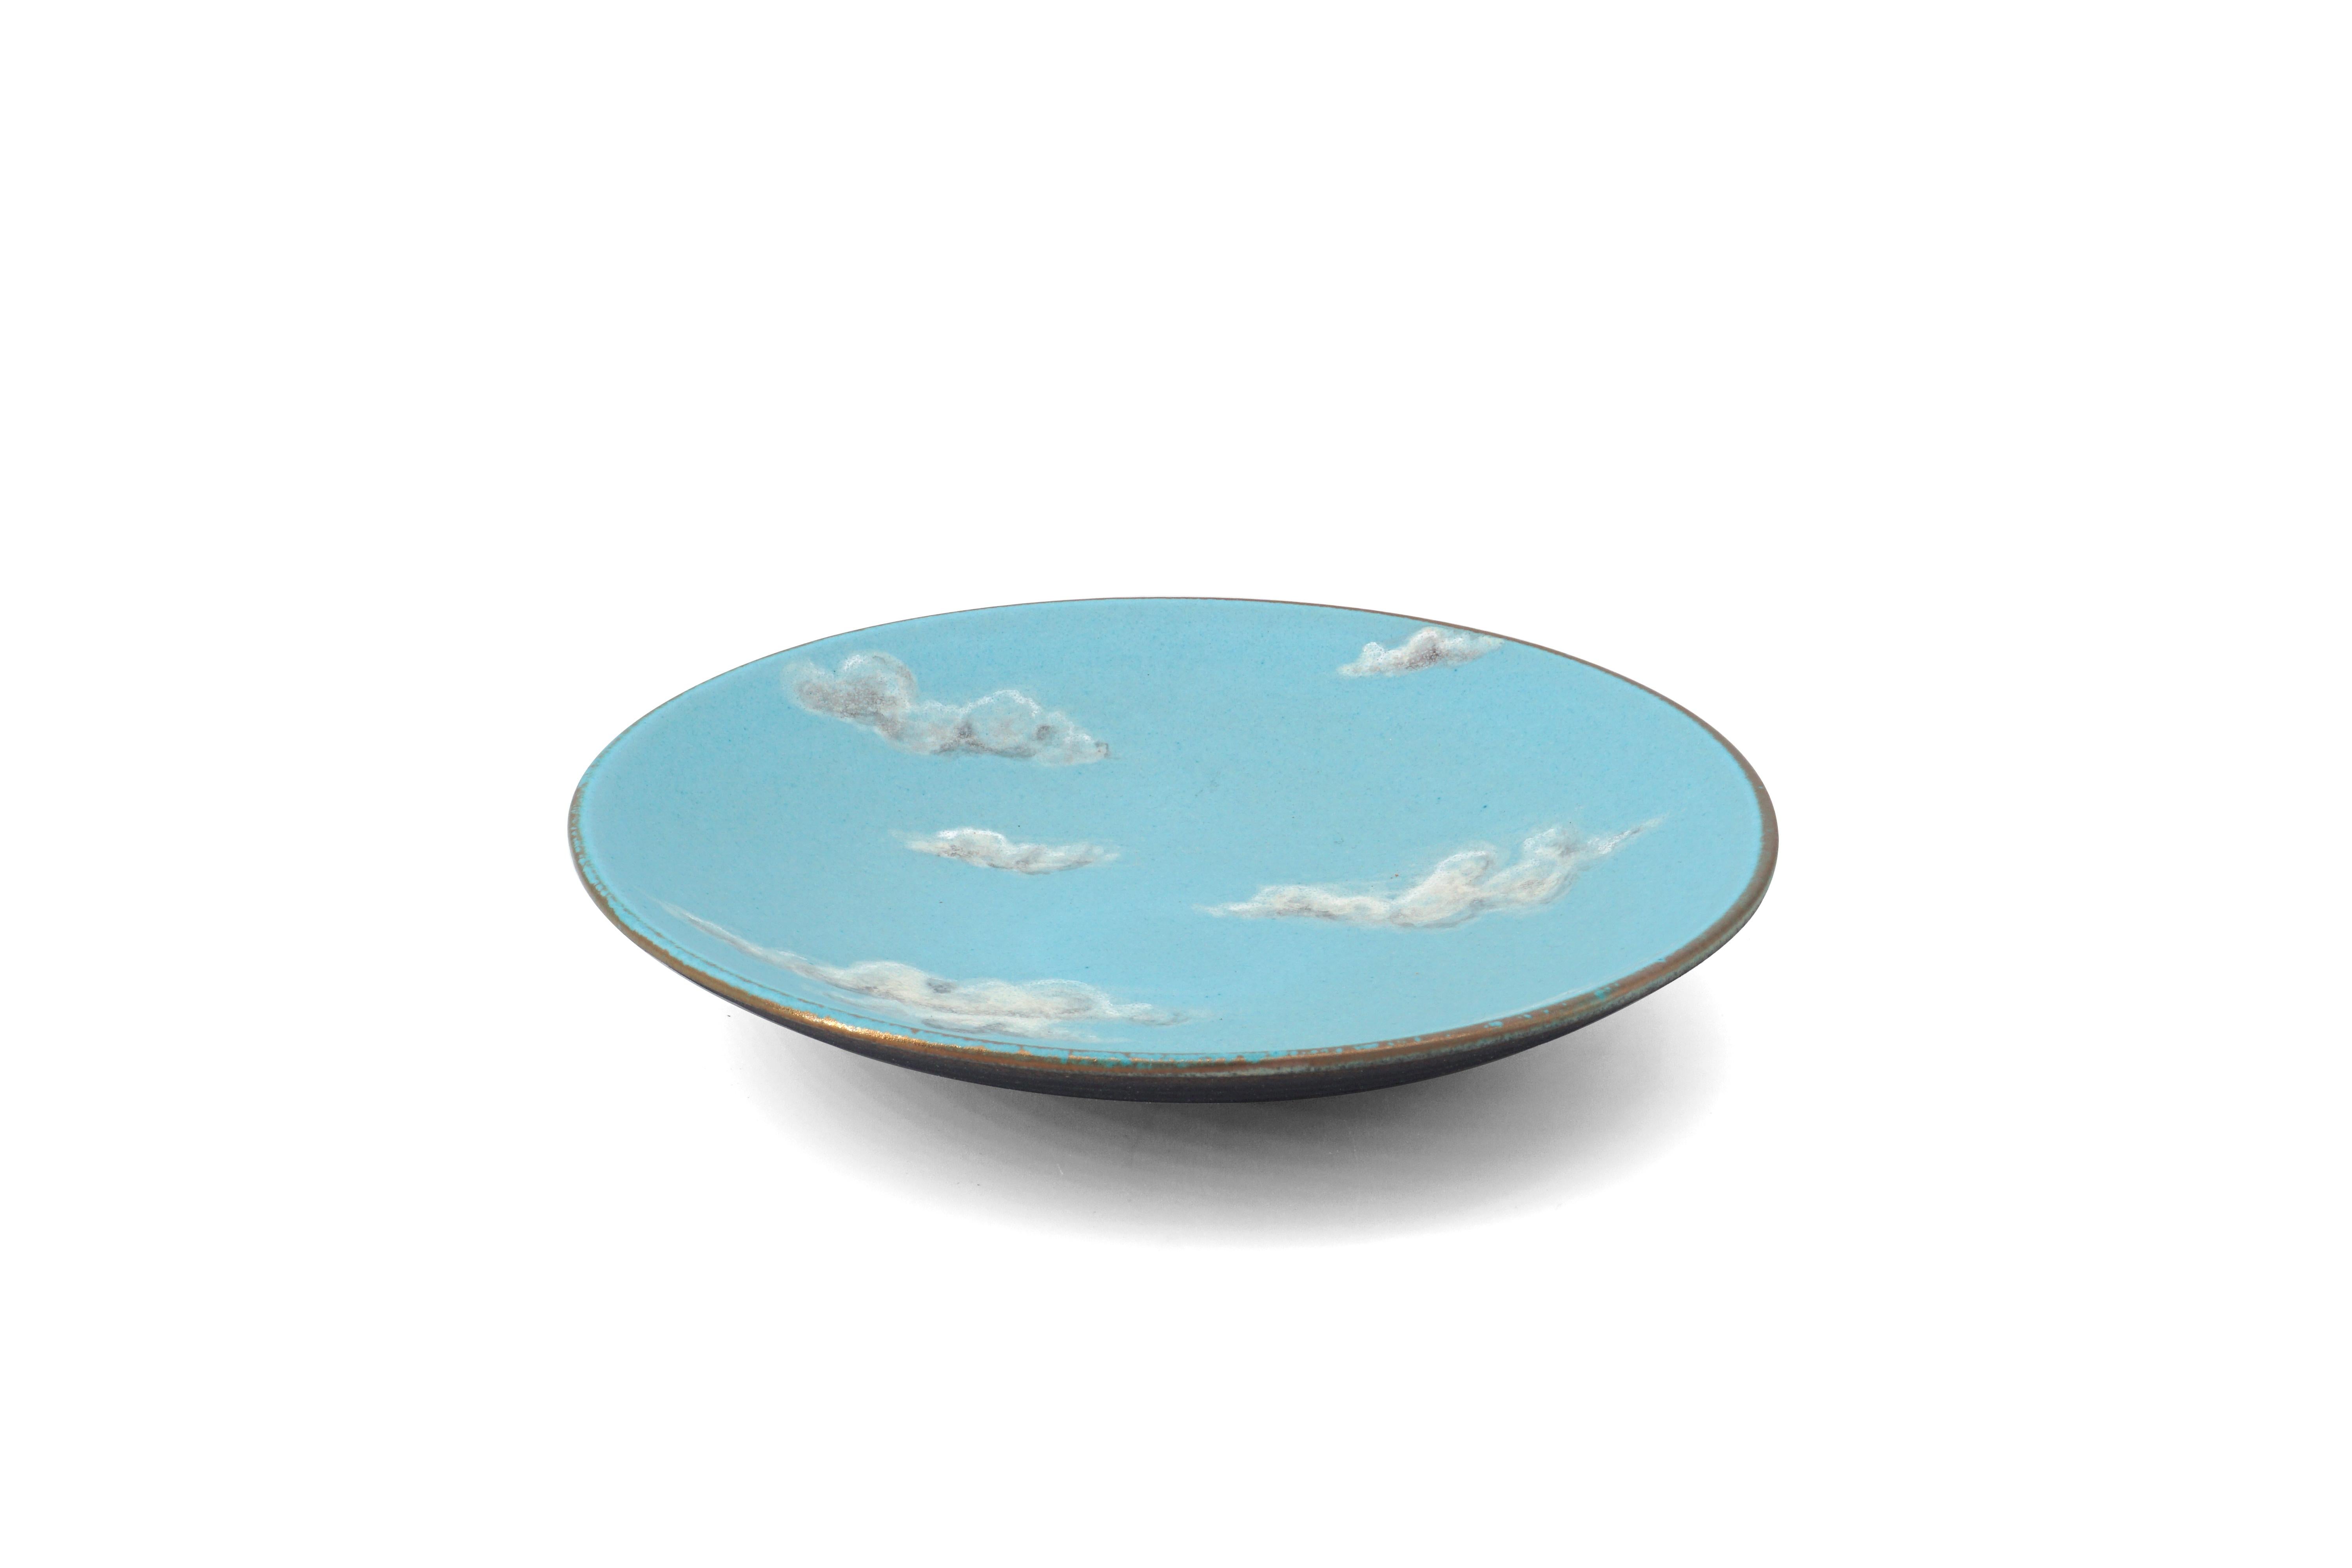 Sky Medium Ceramic Bowl Hand Painted Glazed Majolica Italian Contemporary In New Condition For Sale In London, GB